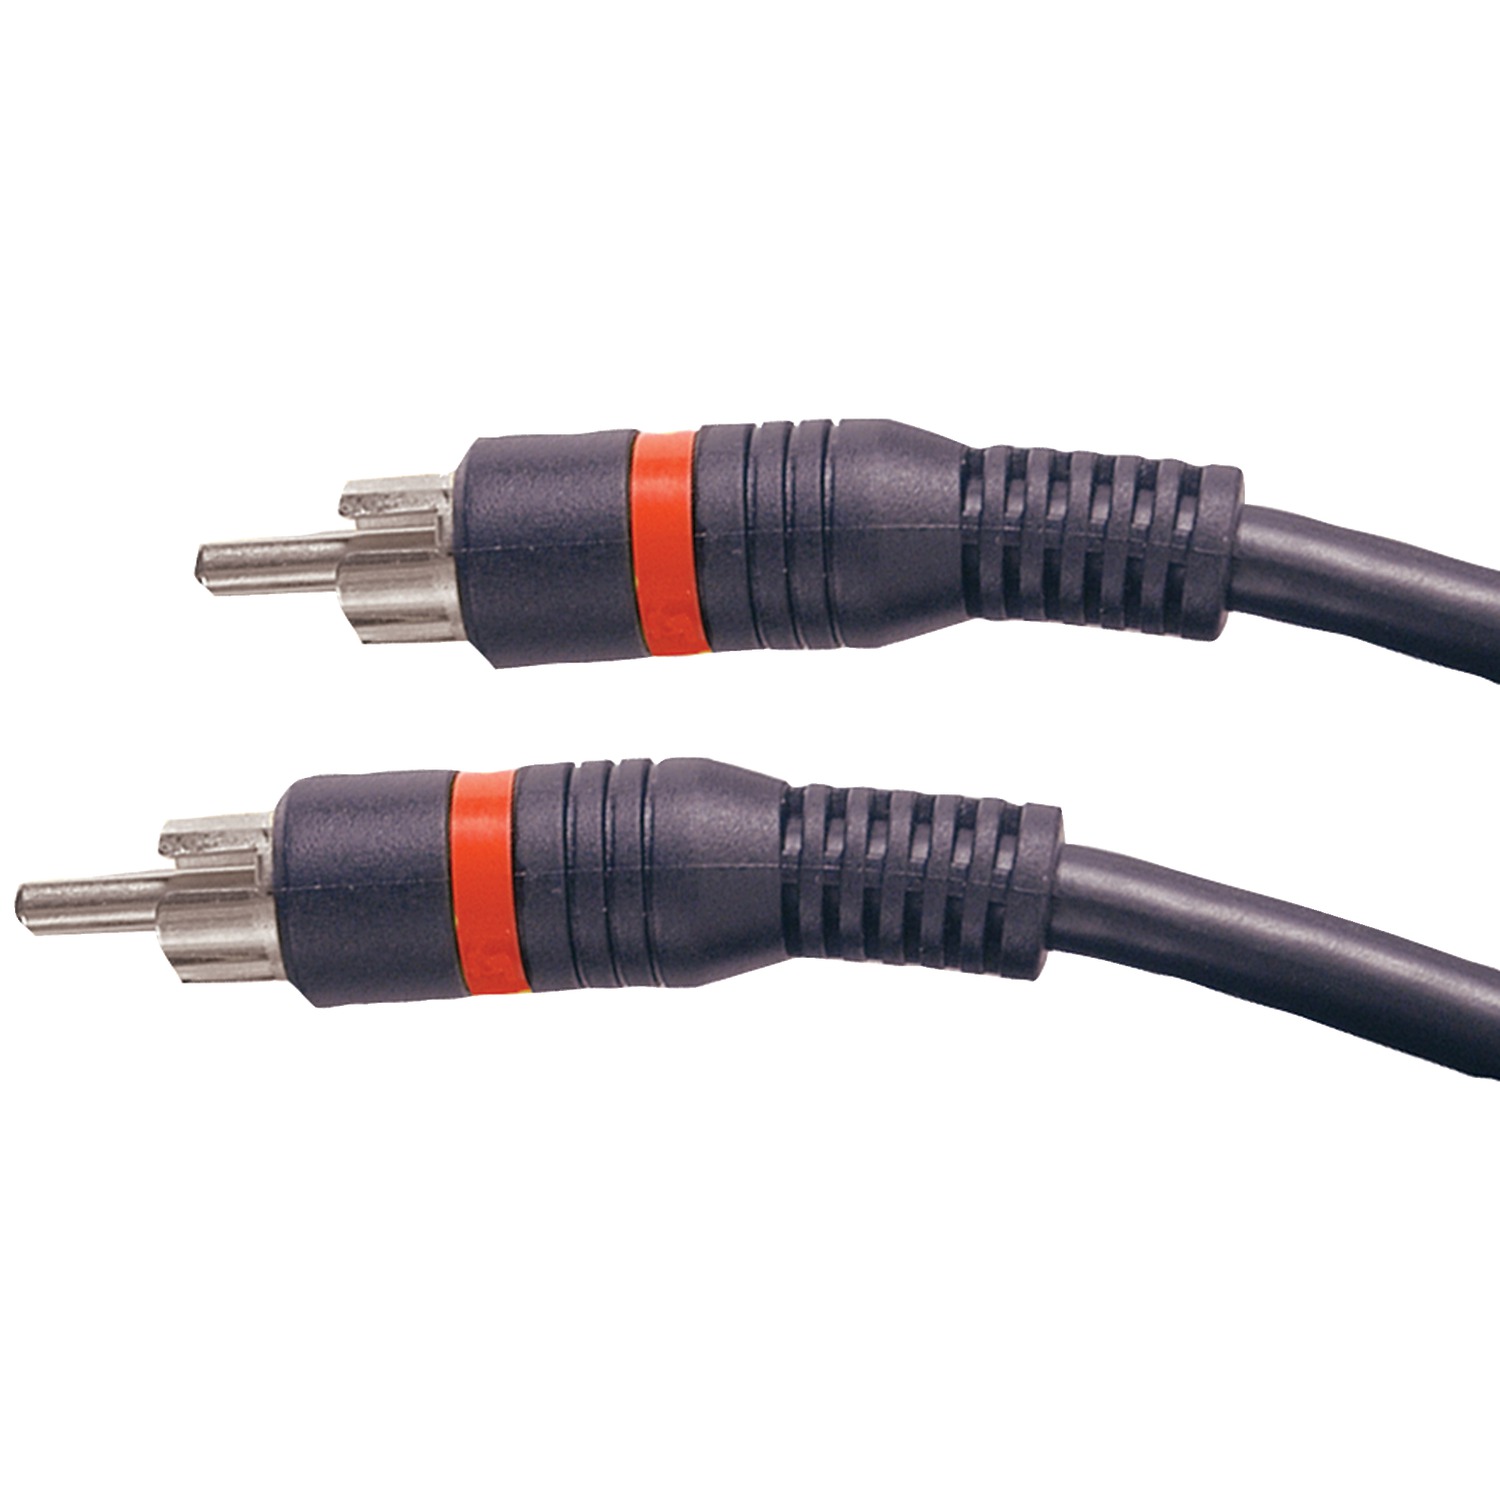 GE Digital Audio Coax Cable - 6 FT, 1.0 CT - image 1 of 5